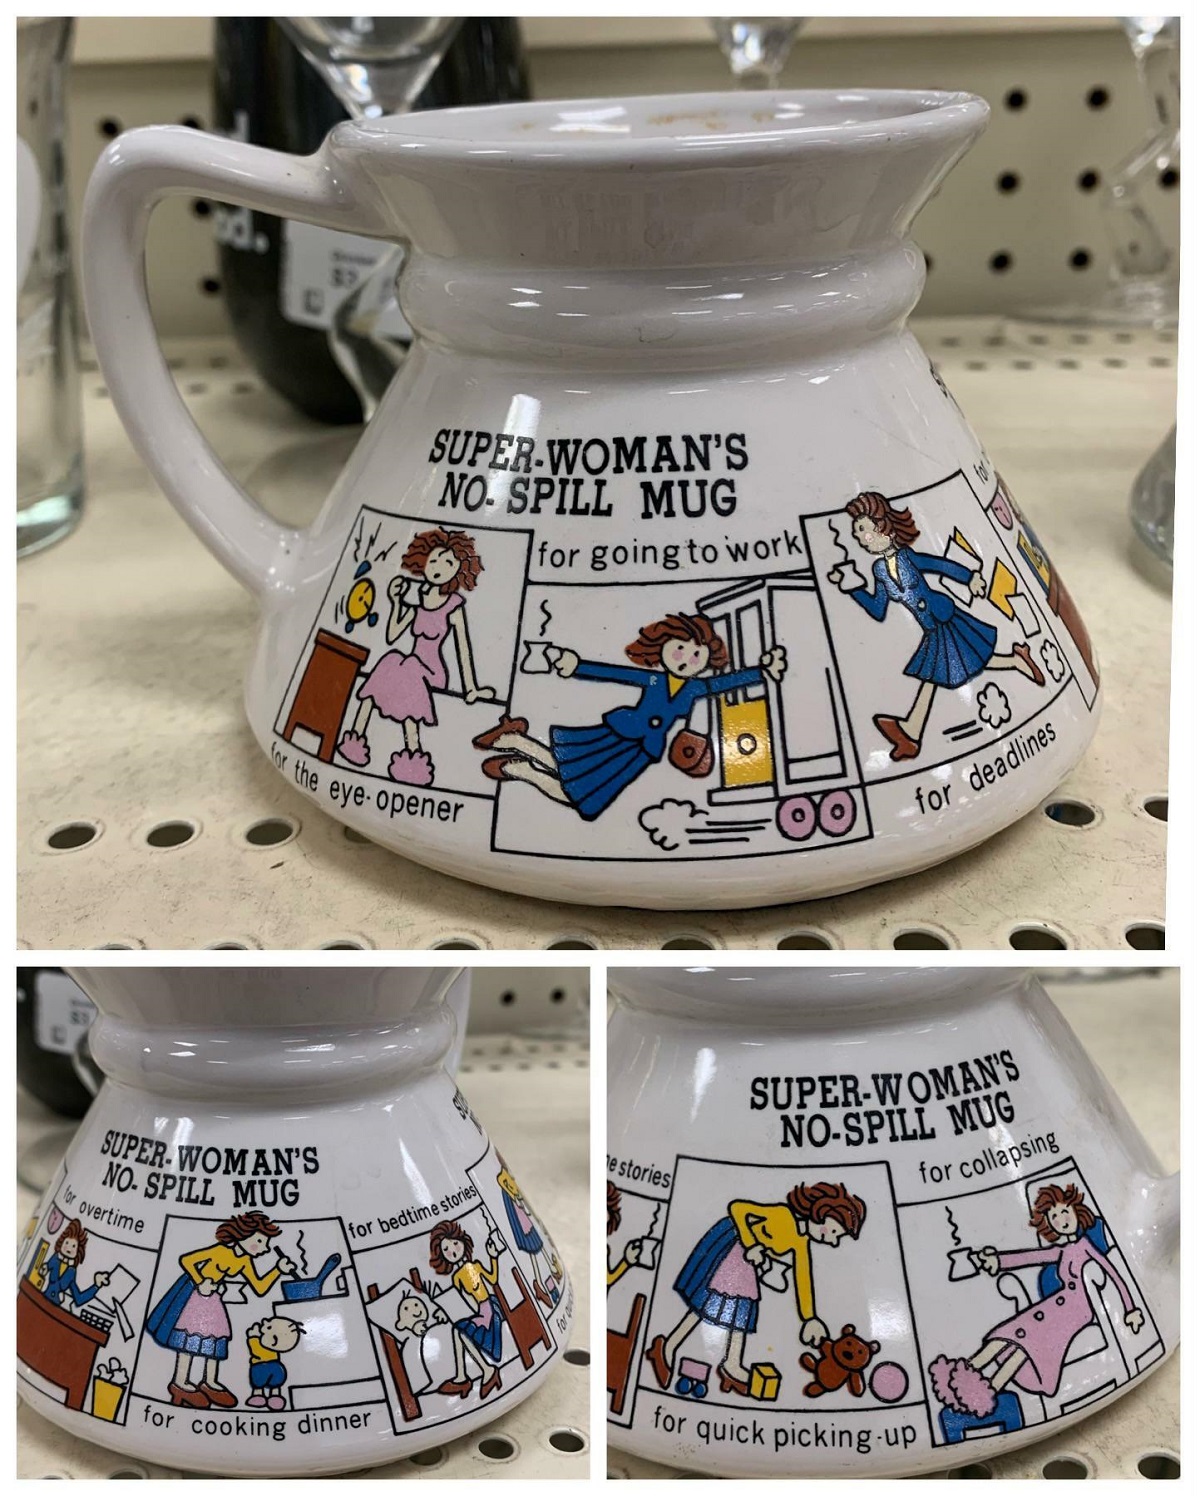 I Regret Not Buying This. I'm Trying To Downsize My Mug Collection Though